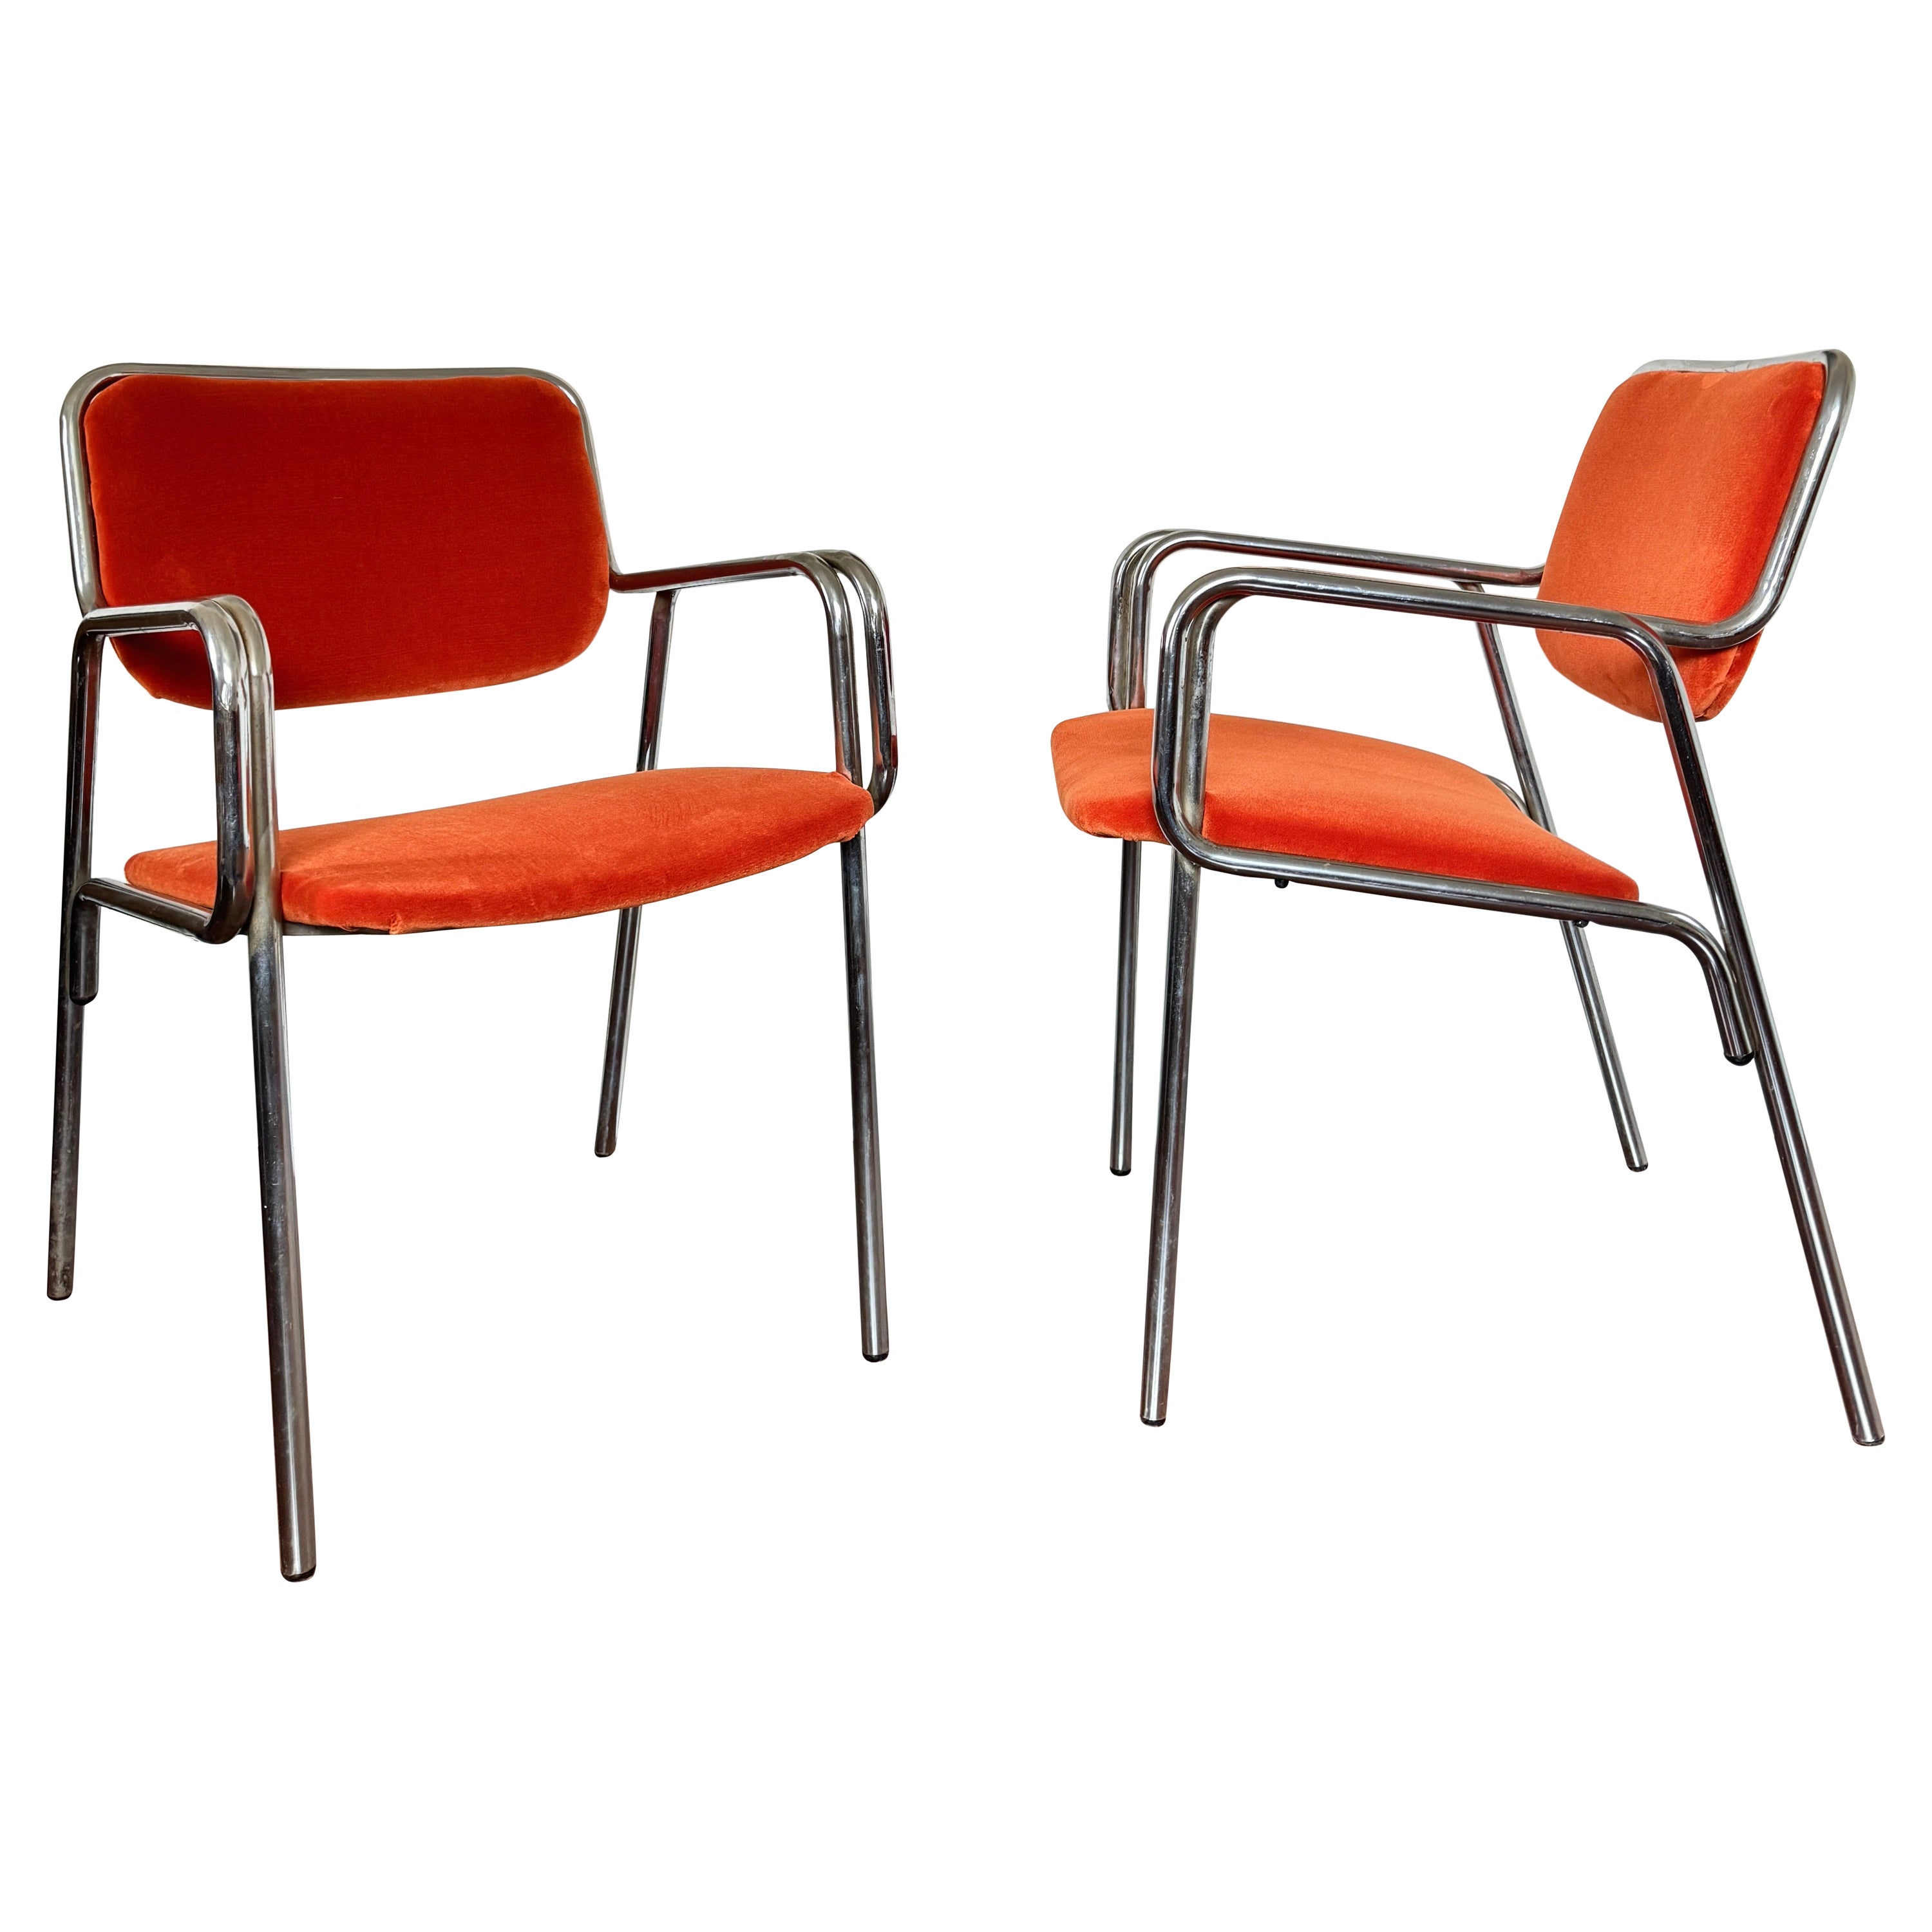 A set of mid century modern tubular arm chairs by Global Upholstery Company